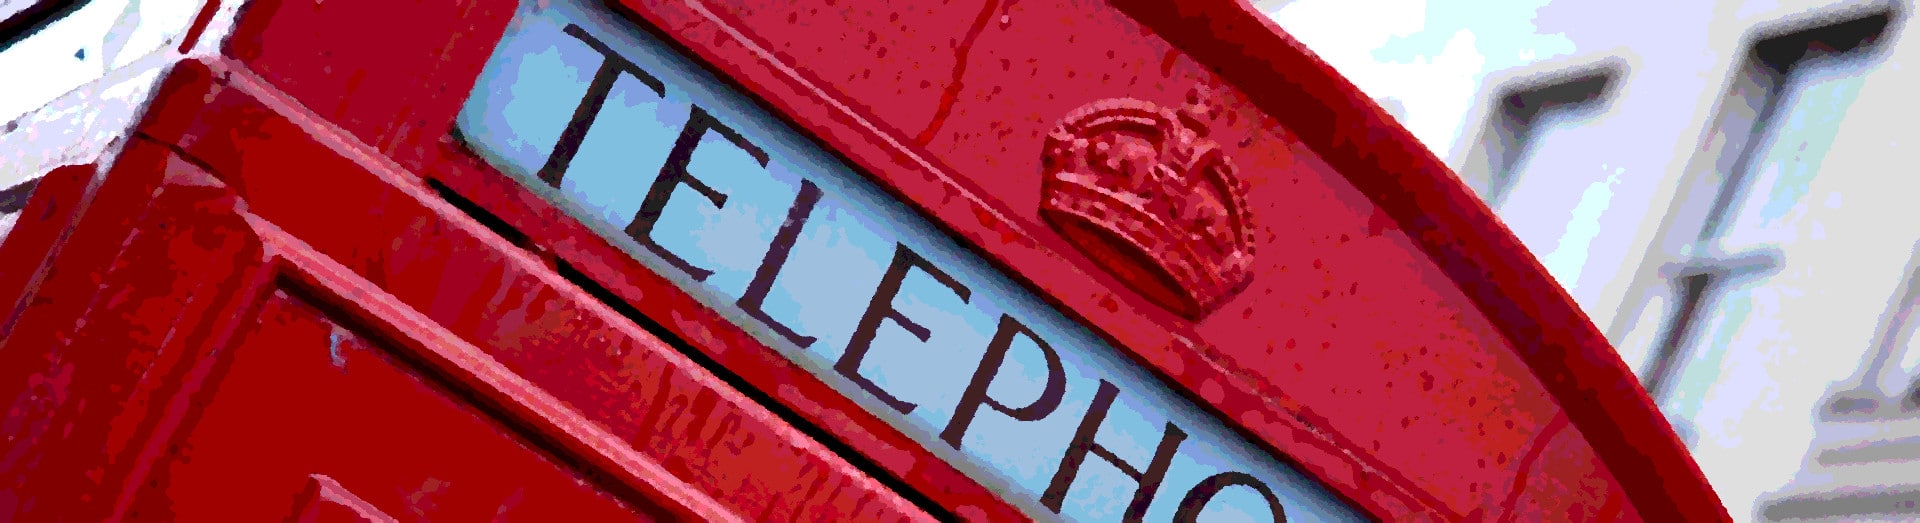 Large_telephone_booth_artsy1920x523